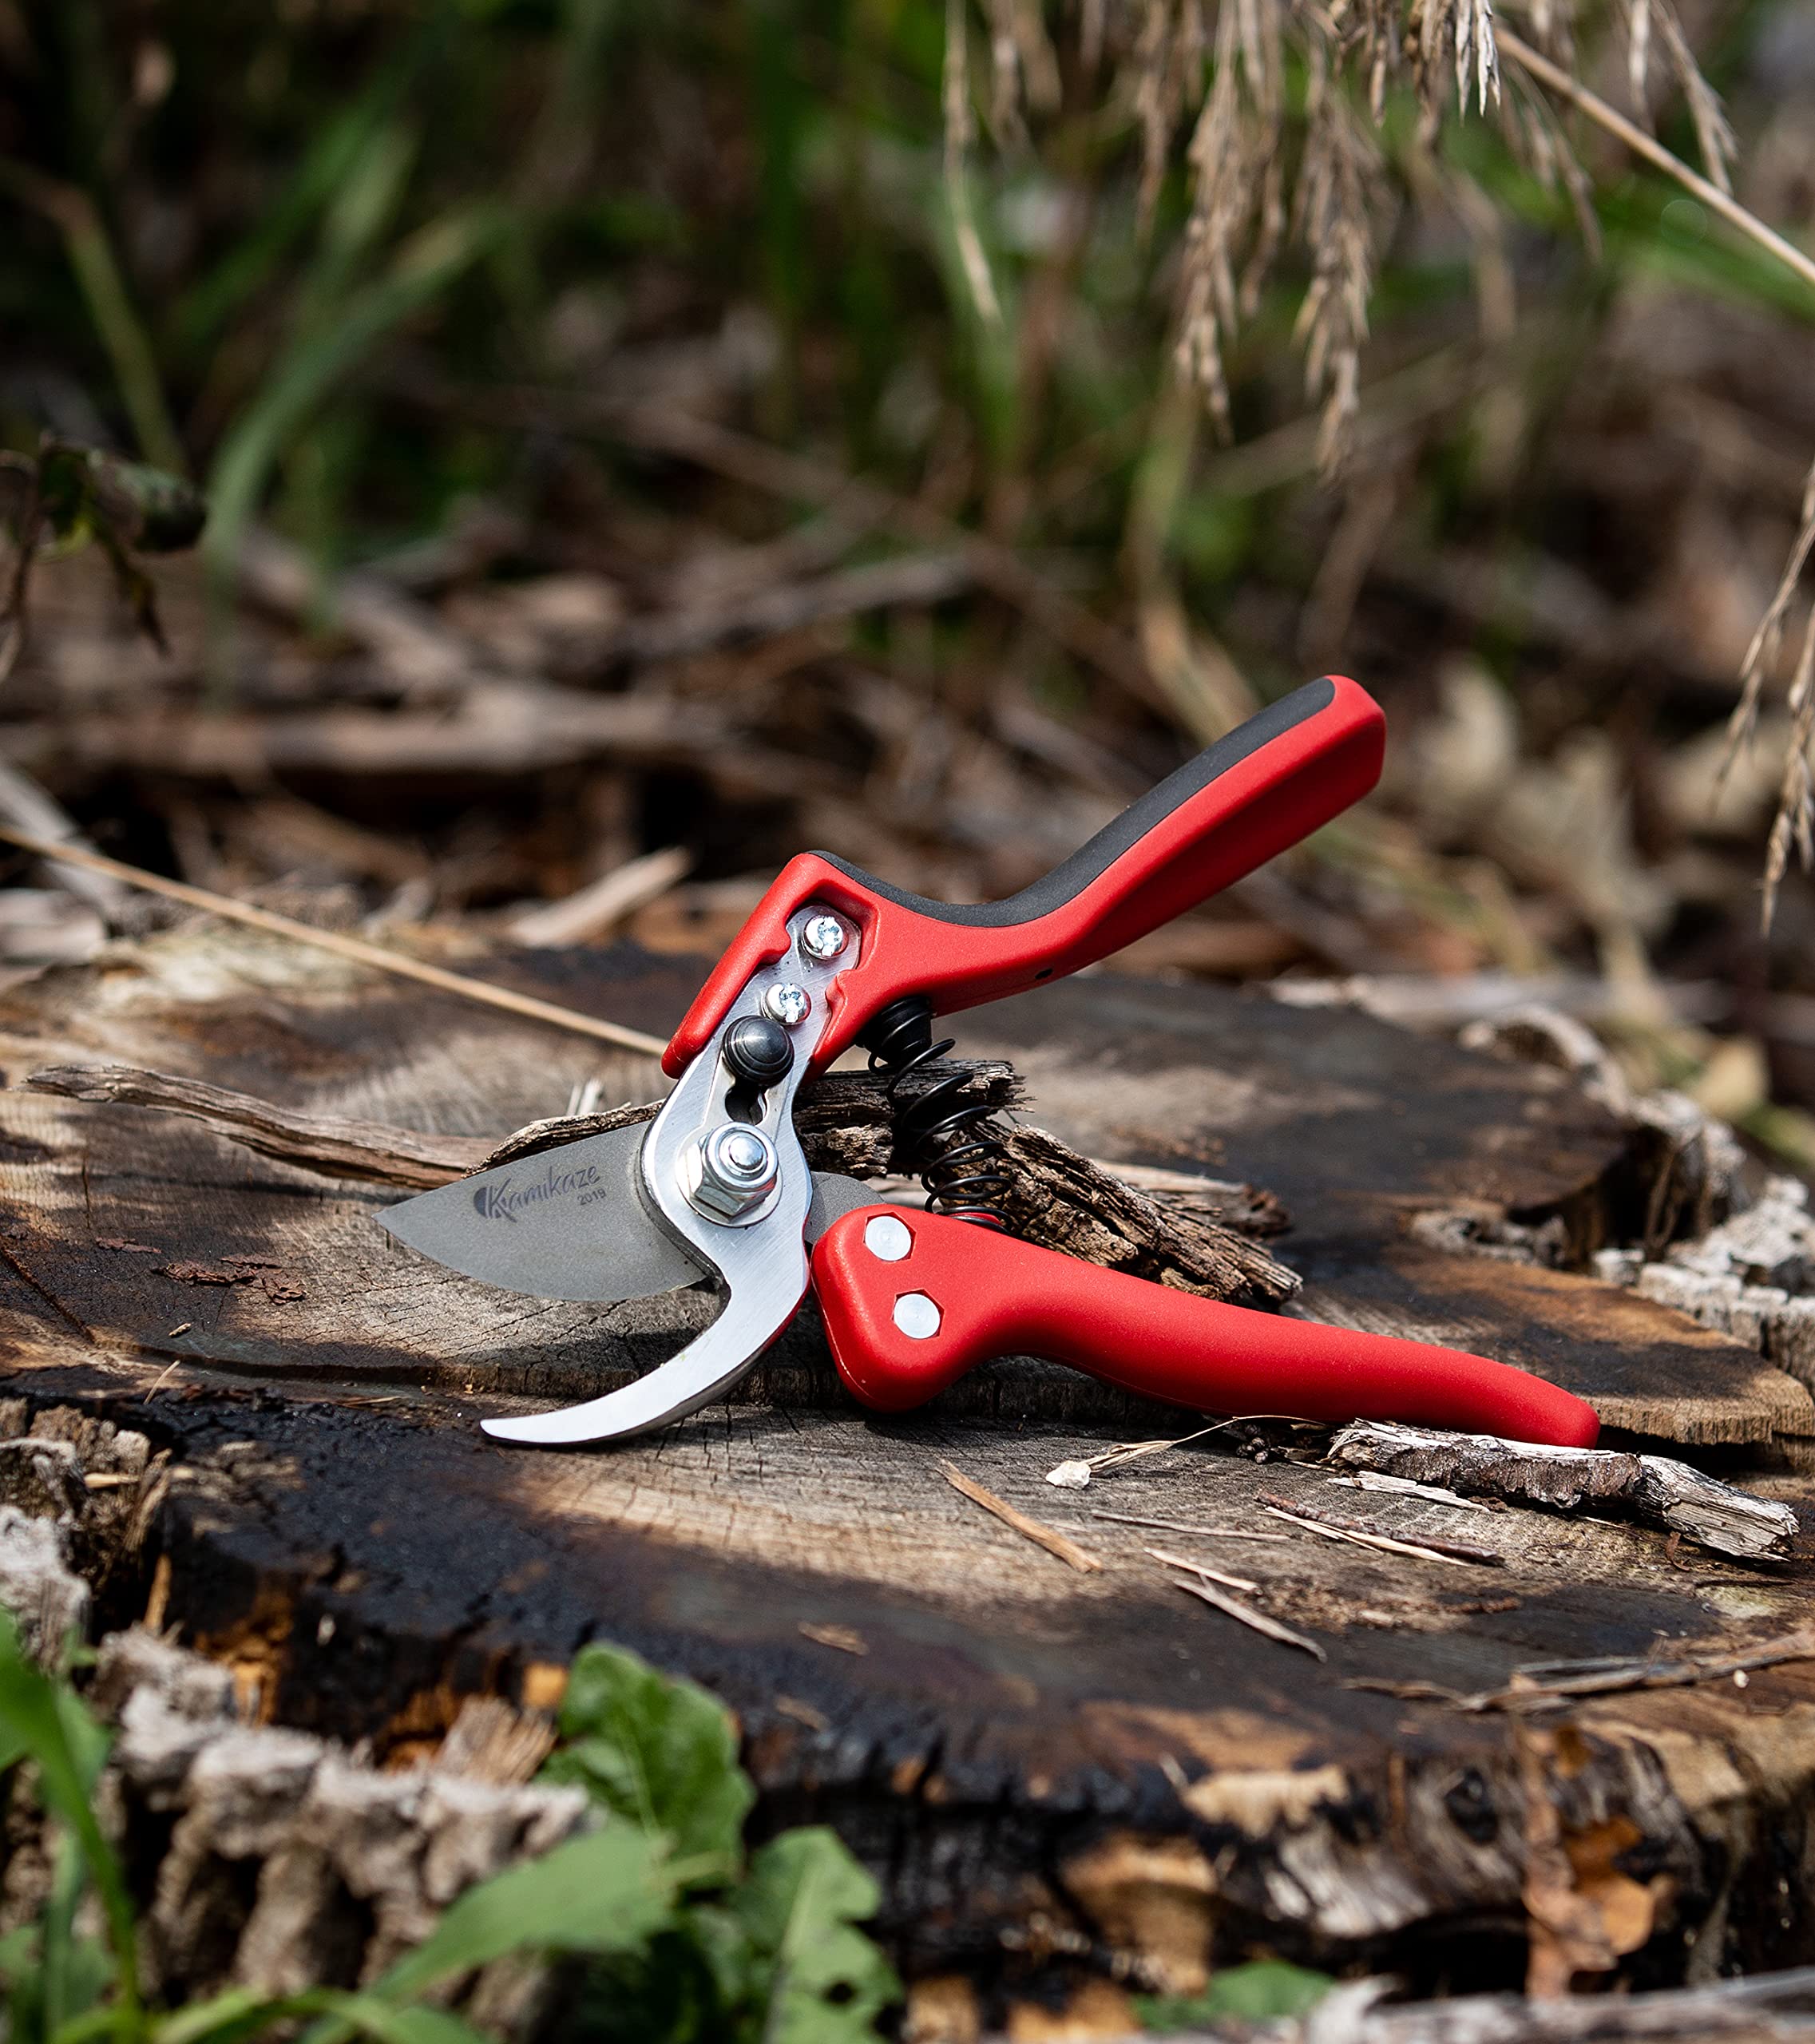 EZ Kut Kamikaze Force Bypass Pruning Shears Heavy Duty - Best Pruners for Gardening and Gardening Gifts for Women and Men - Gardening Hand Tools with a since 1988